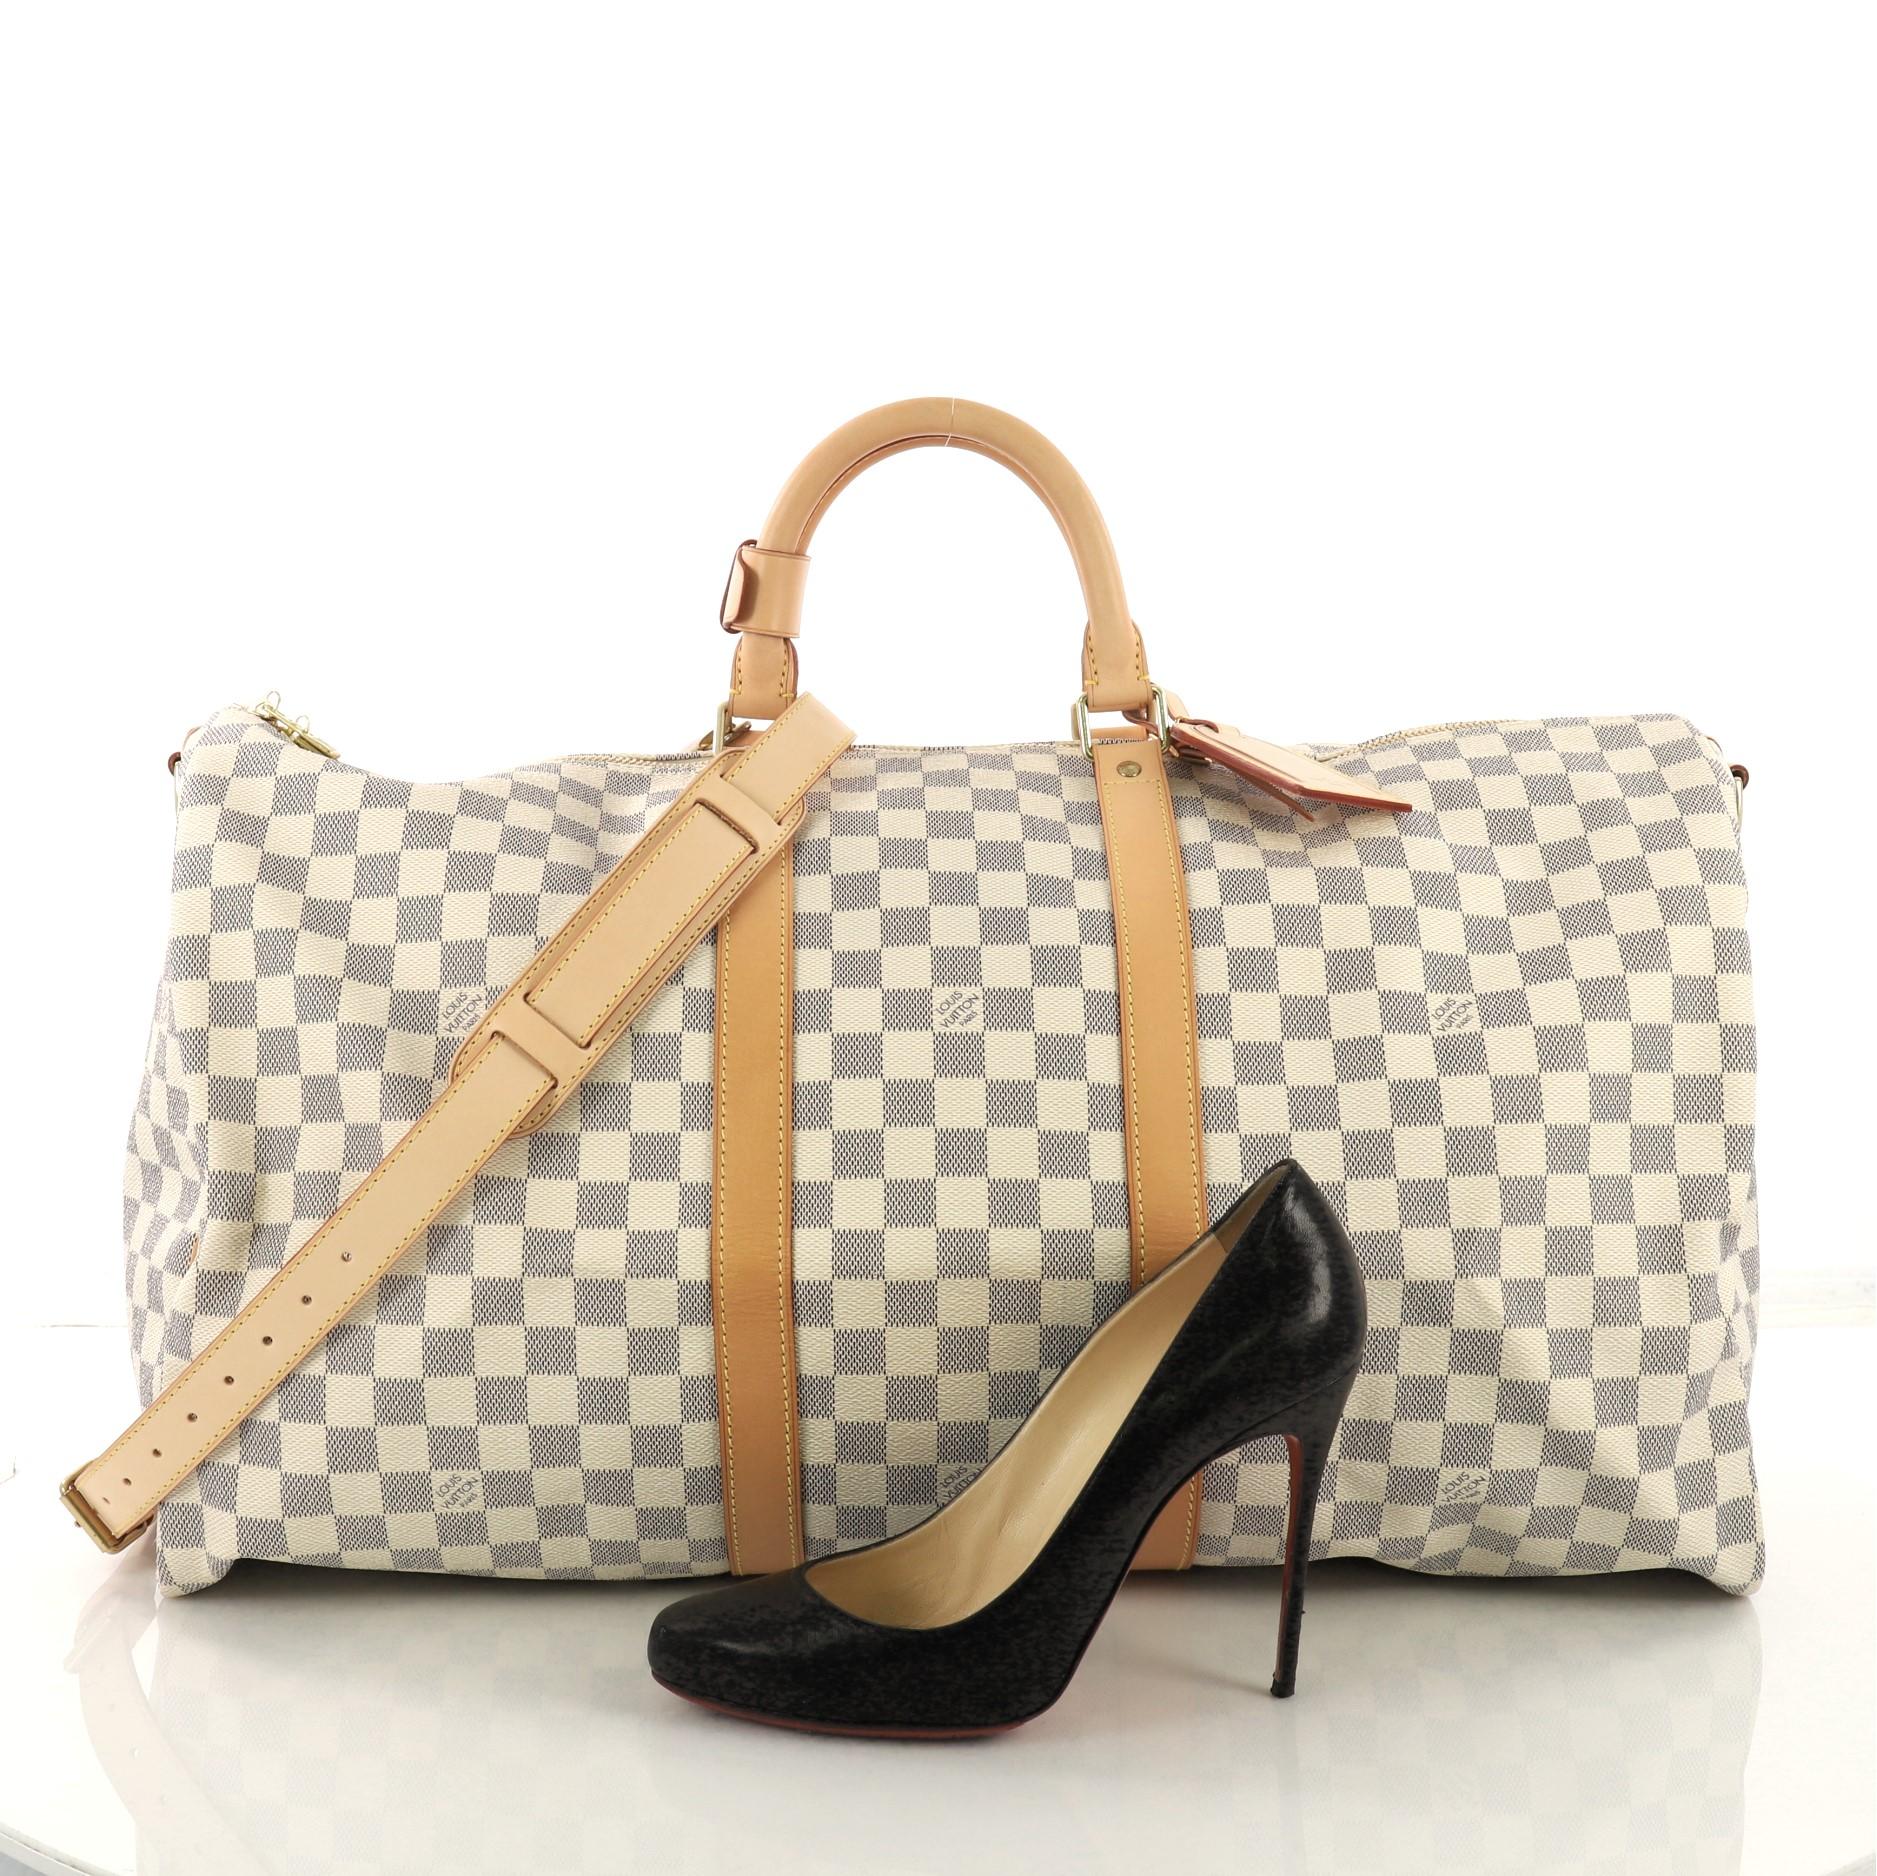 This Louis Vuitton Keepall Bandouliere Bag Damier 55 crafted from damier azur coated canvas, features dual rolled handles, leather trim, and gold-tone hardware. Its two-way top zip closure opens to a beige fabric interior. Authenticity code reads: